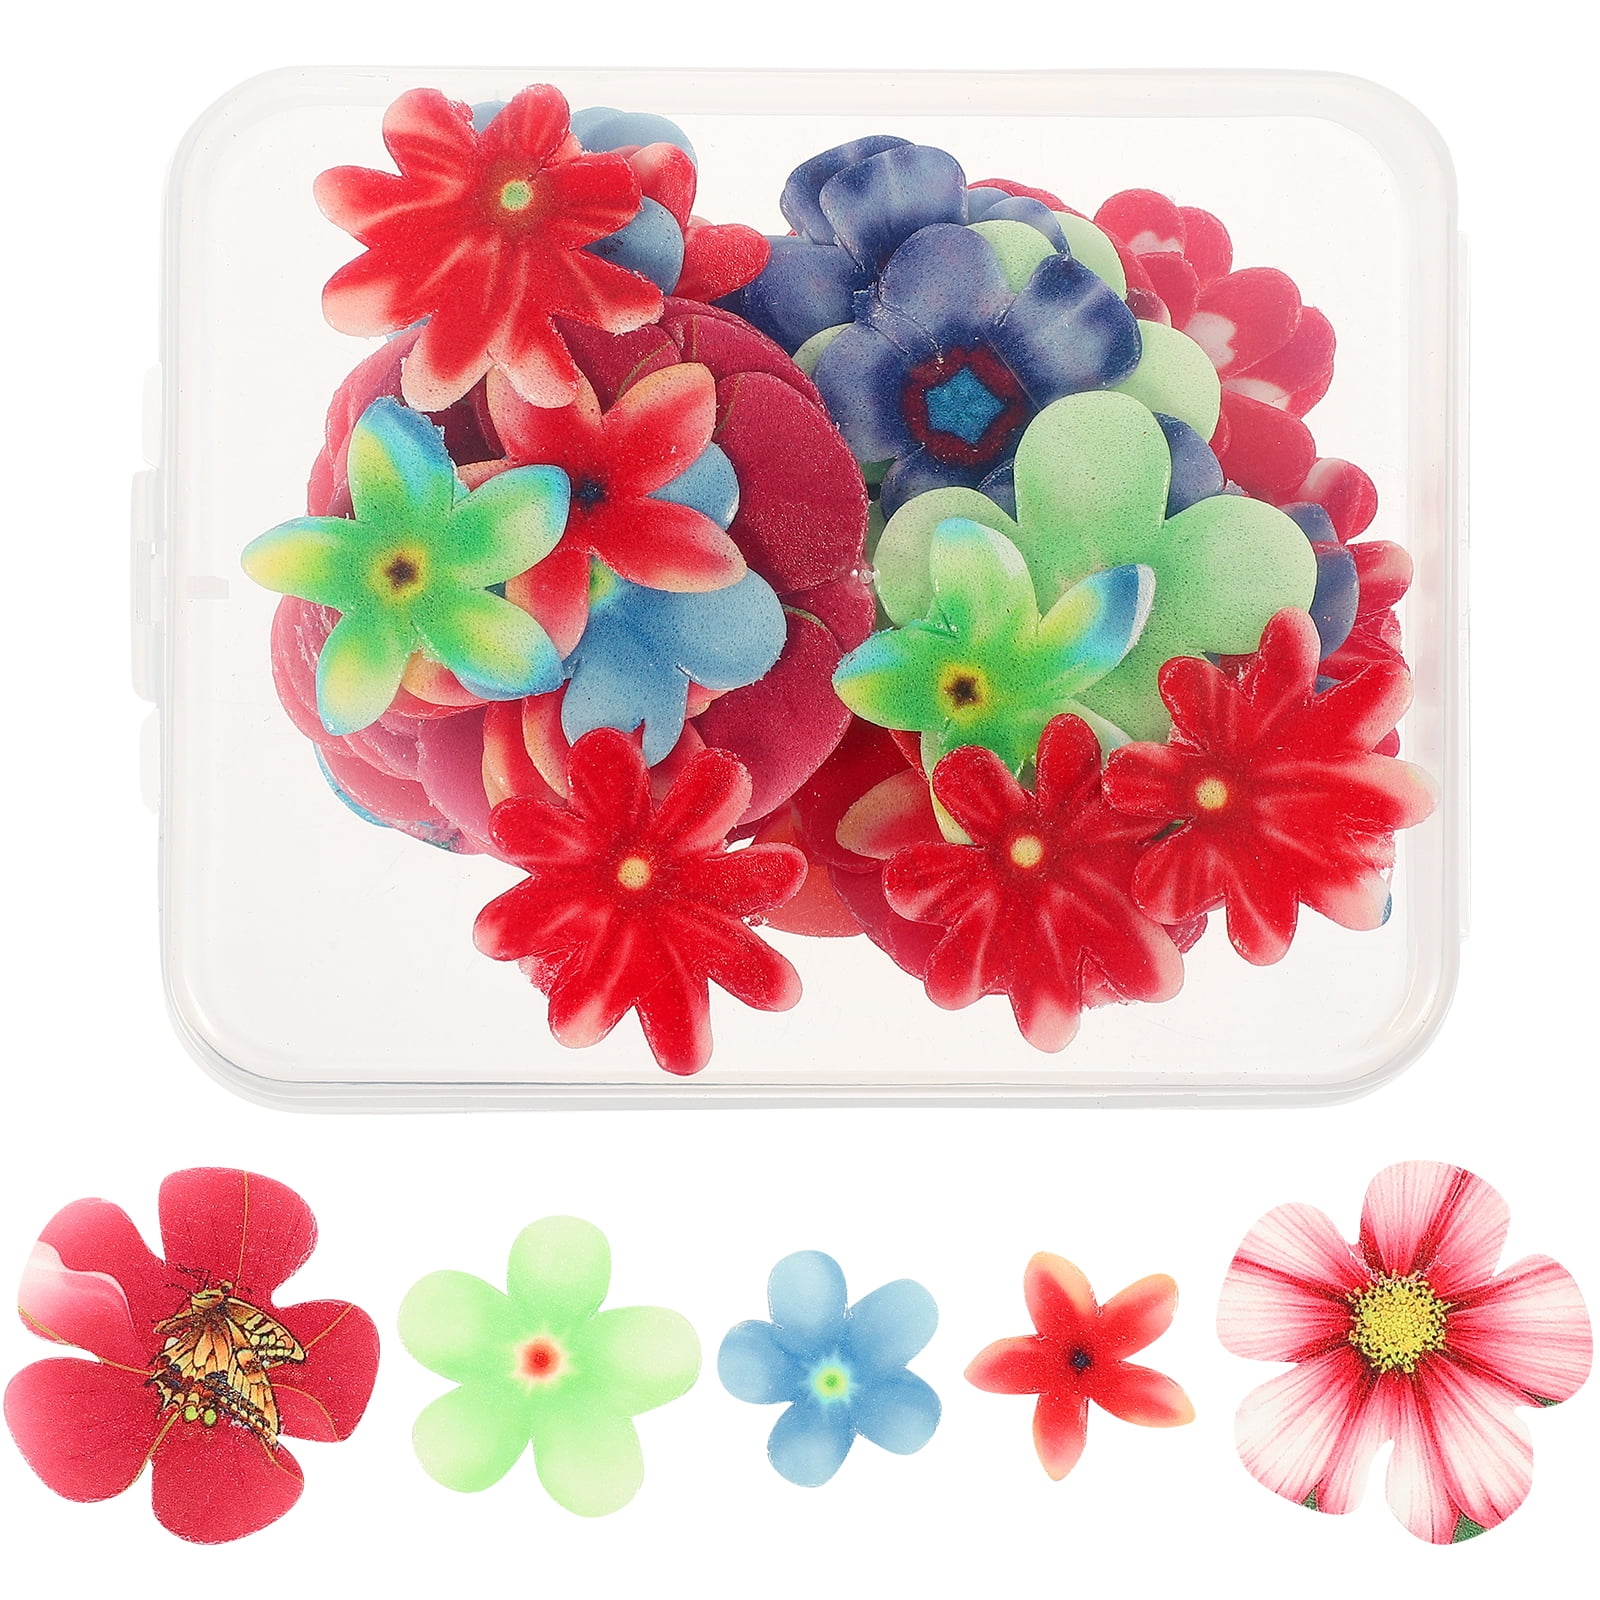 Hemoton Edible Cake Decorations Flowers Paper Decorating Rice Butterflies Easter Cupcake Toppers, Size: 19